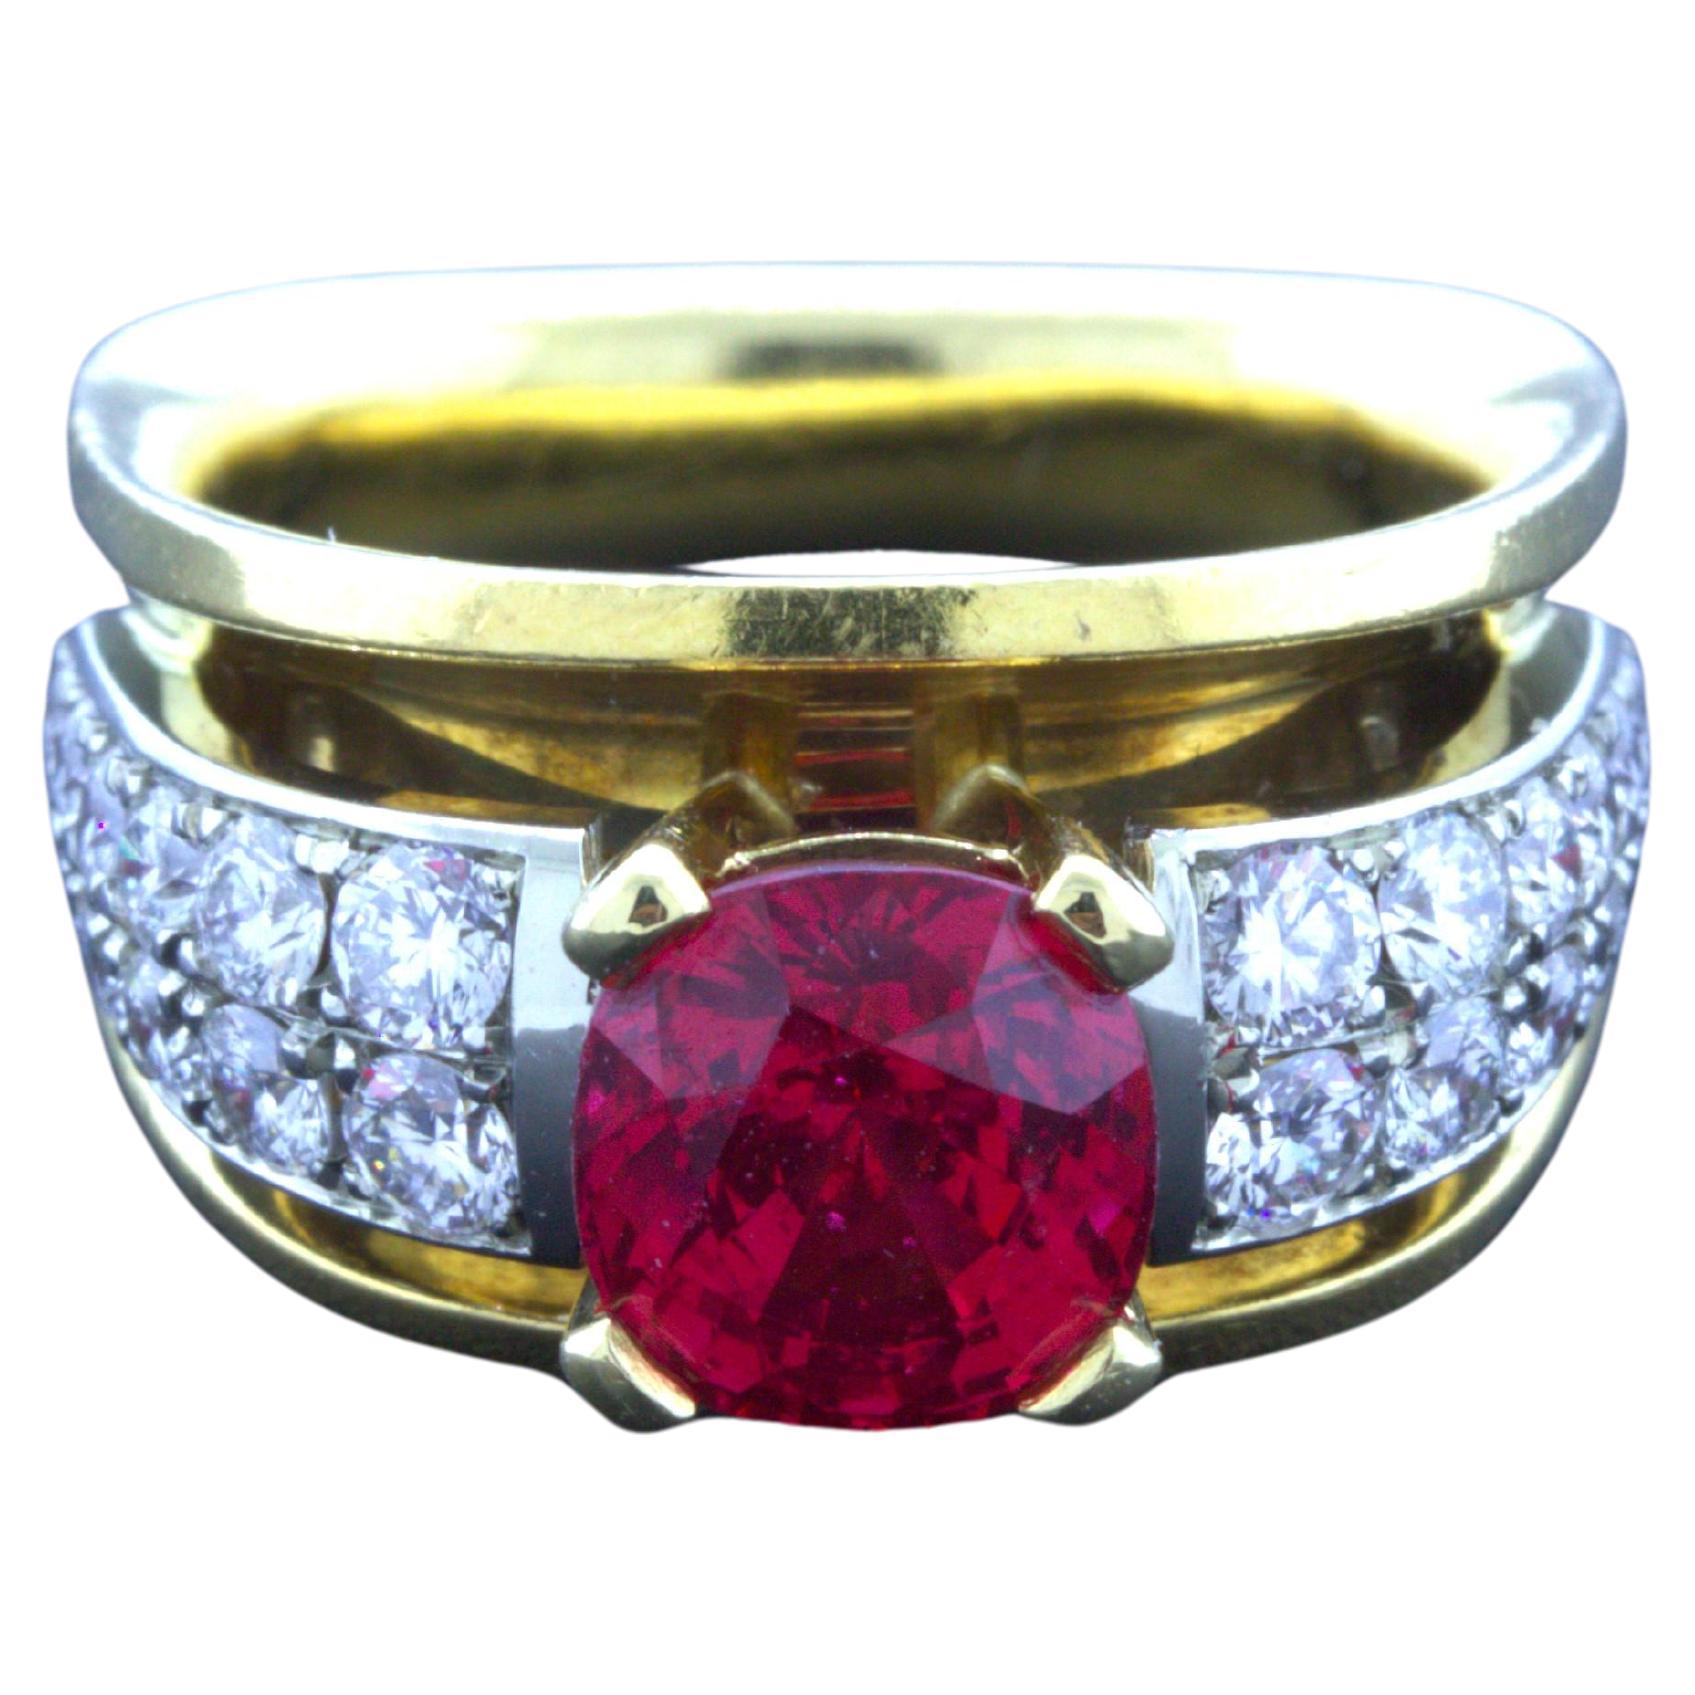 Exceptional 2.28 Carat Burmese Red Spinel Diamond 18K Yellow Gold Ring, GIA Cert For Sale